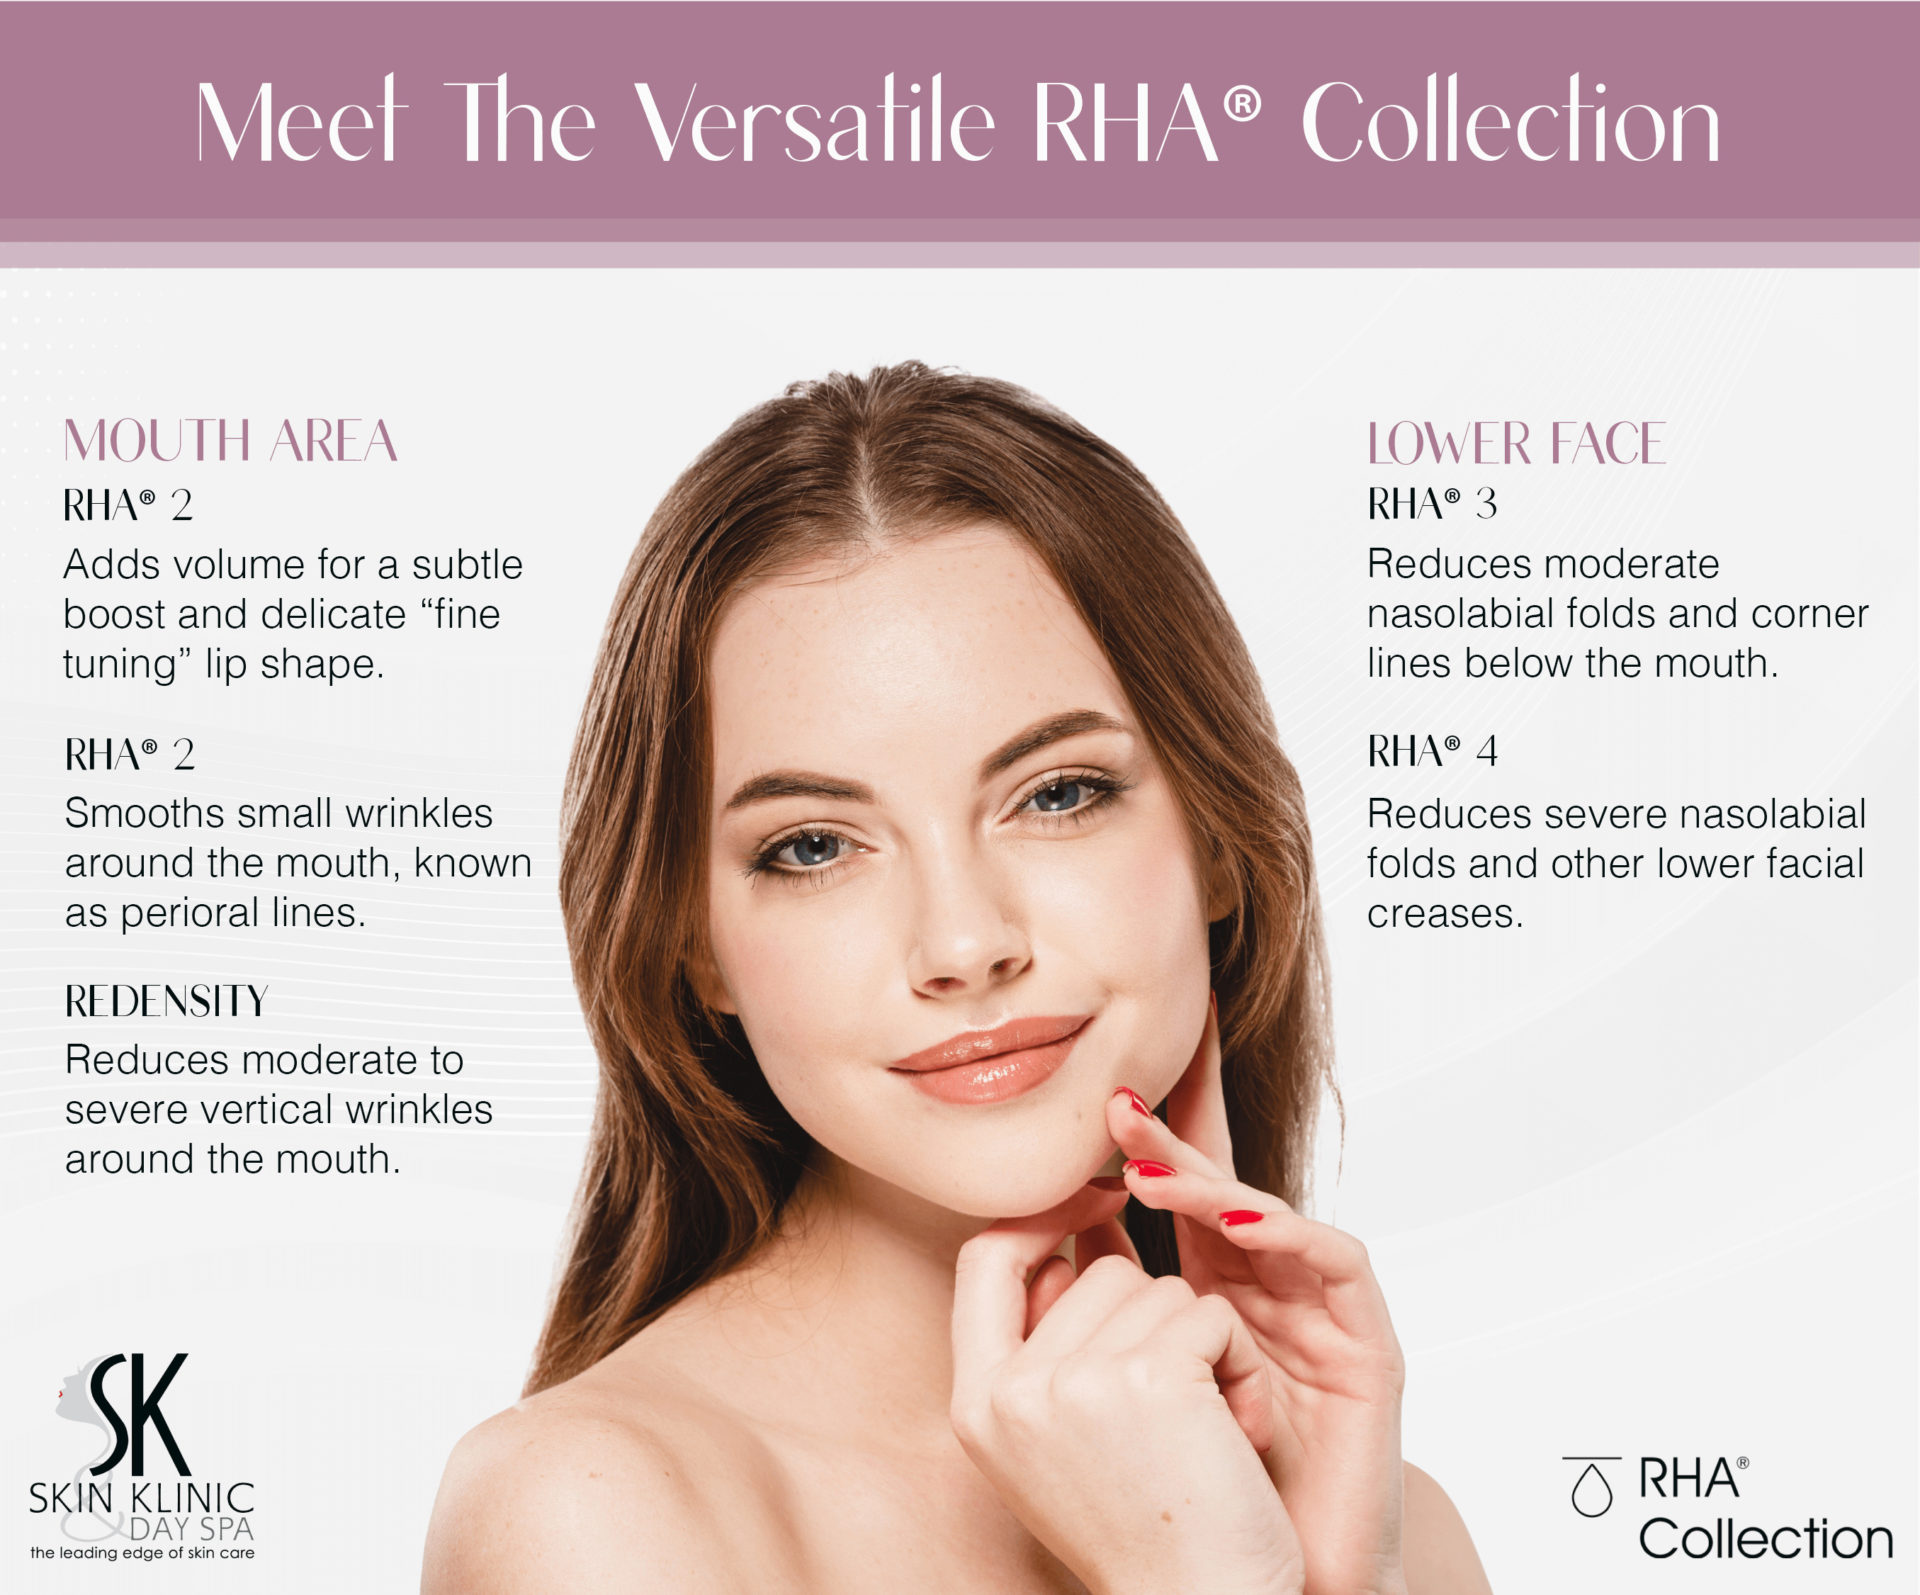 Discover the RHA® Collection at Rockland, Maine’s Skin Klinic & Day Spa.